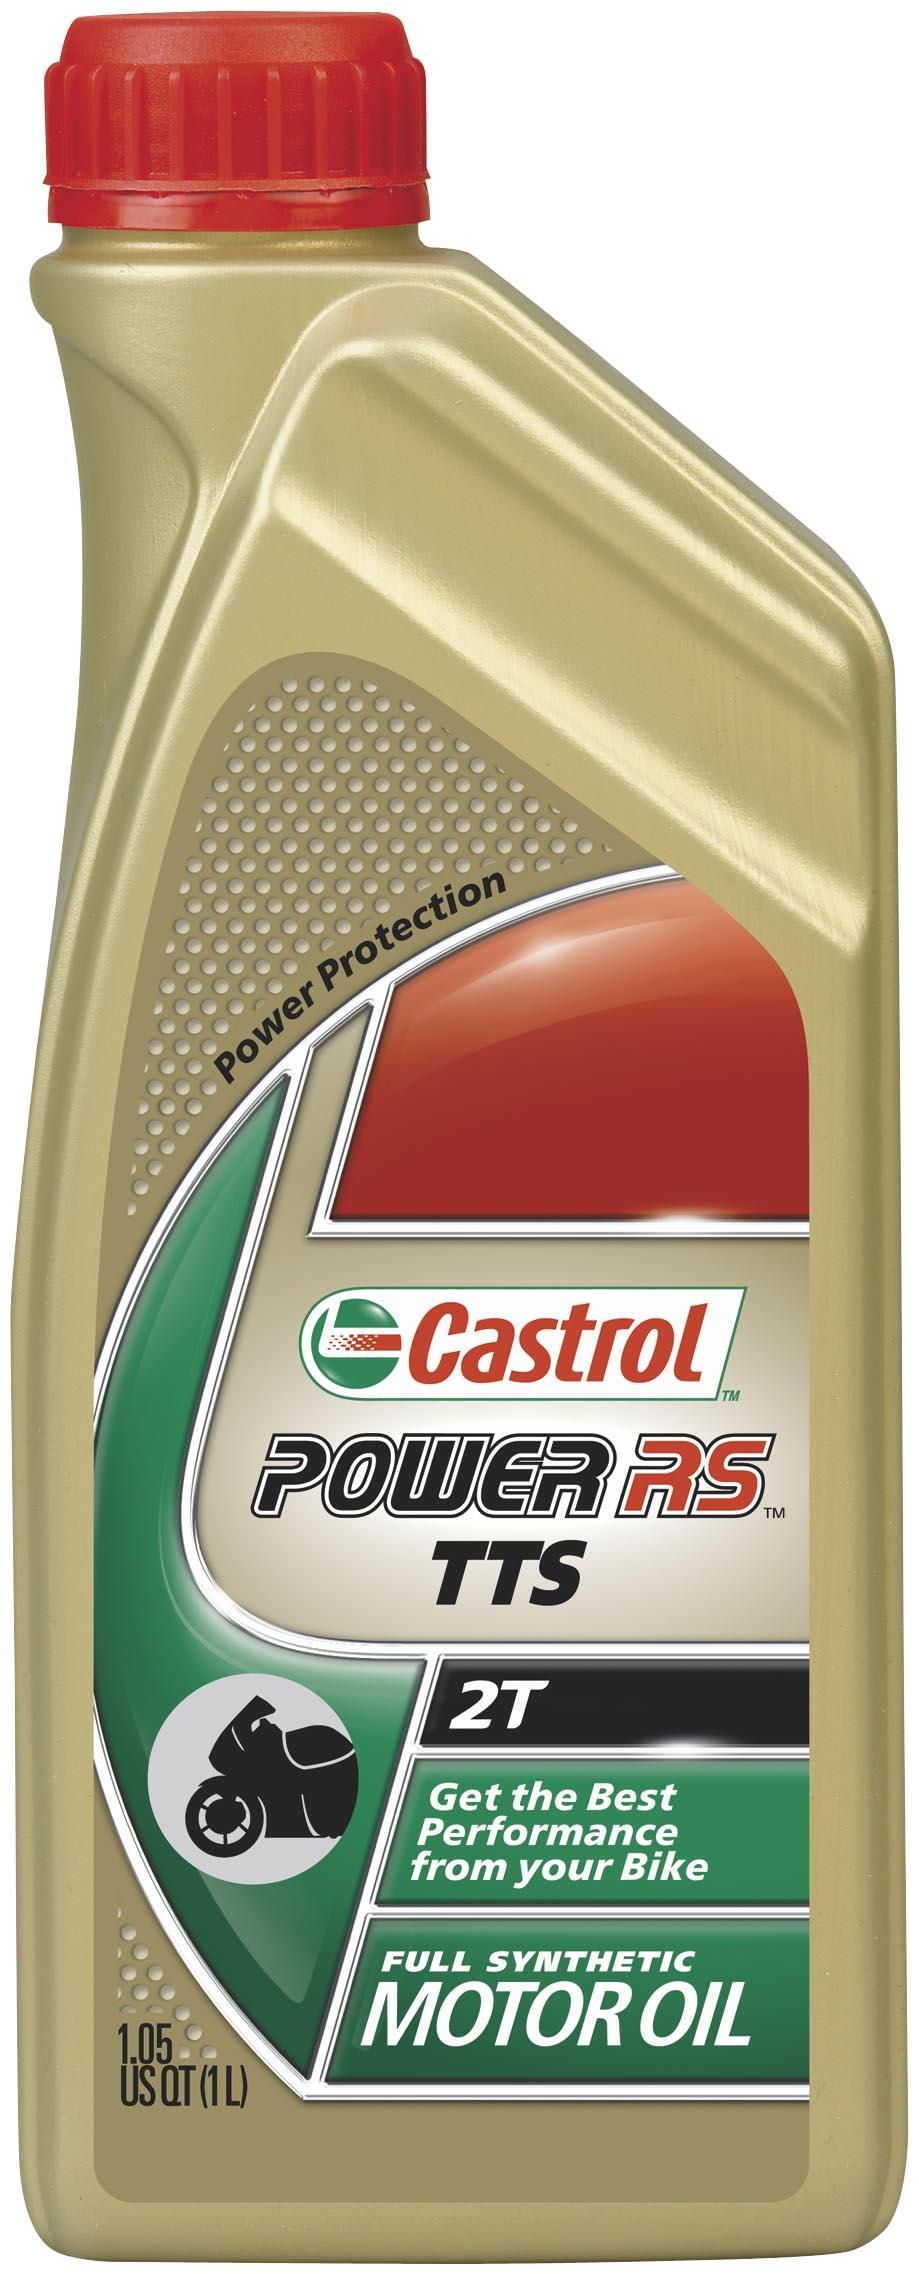 4CME-CASTROL-12899 Power RS TTS 2T 100% Synthetic Oil - 1L.